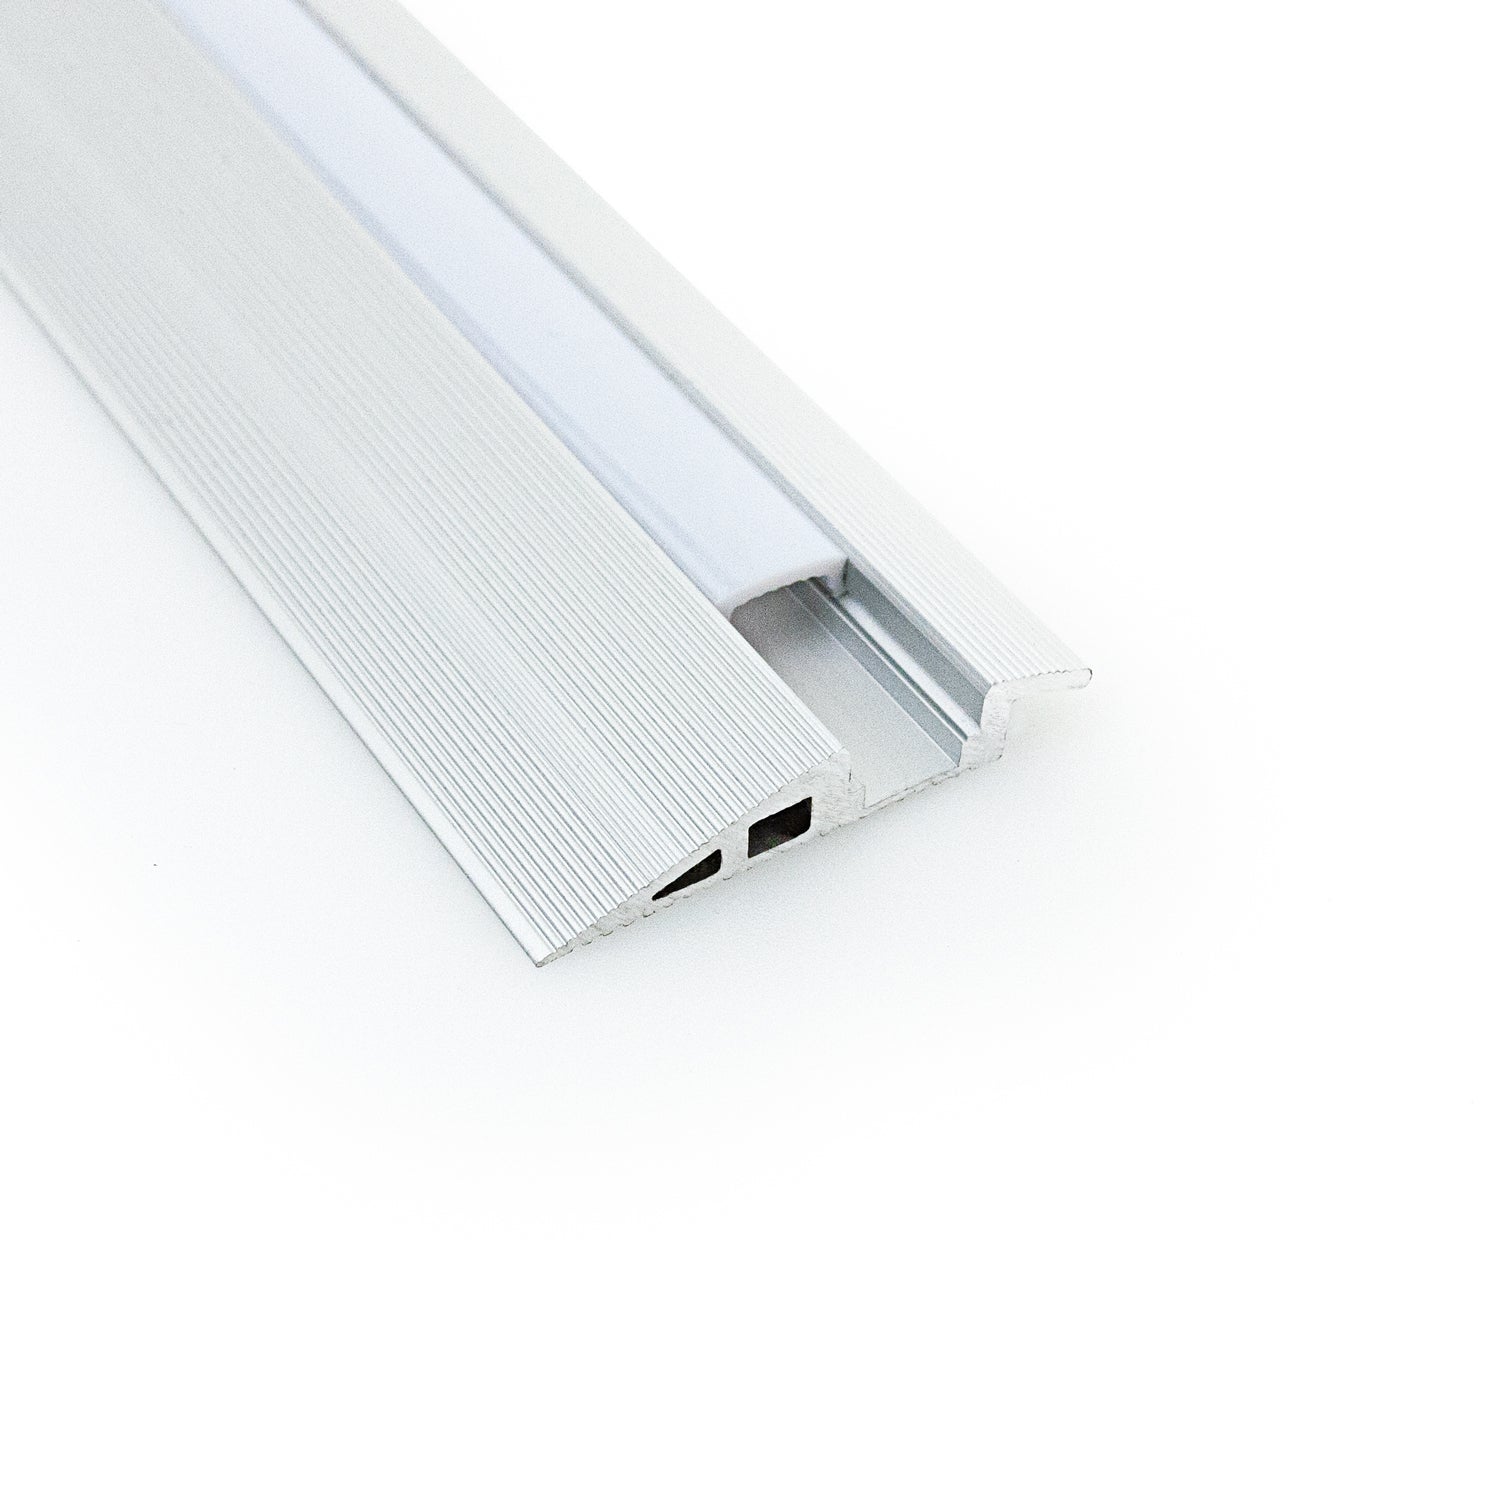 VBD-CH-W4 Multi Floor Transition Aluminum Channel 2.4Meters(94.4in) and 3Meters(118in), Veroboard